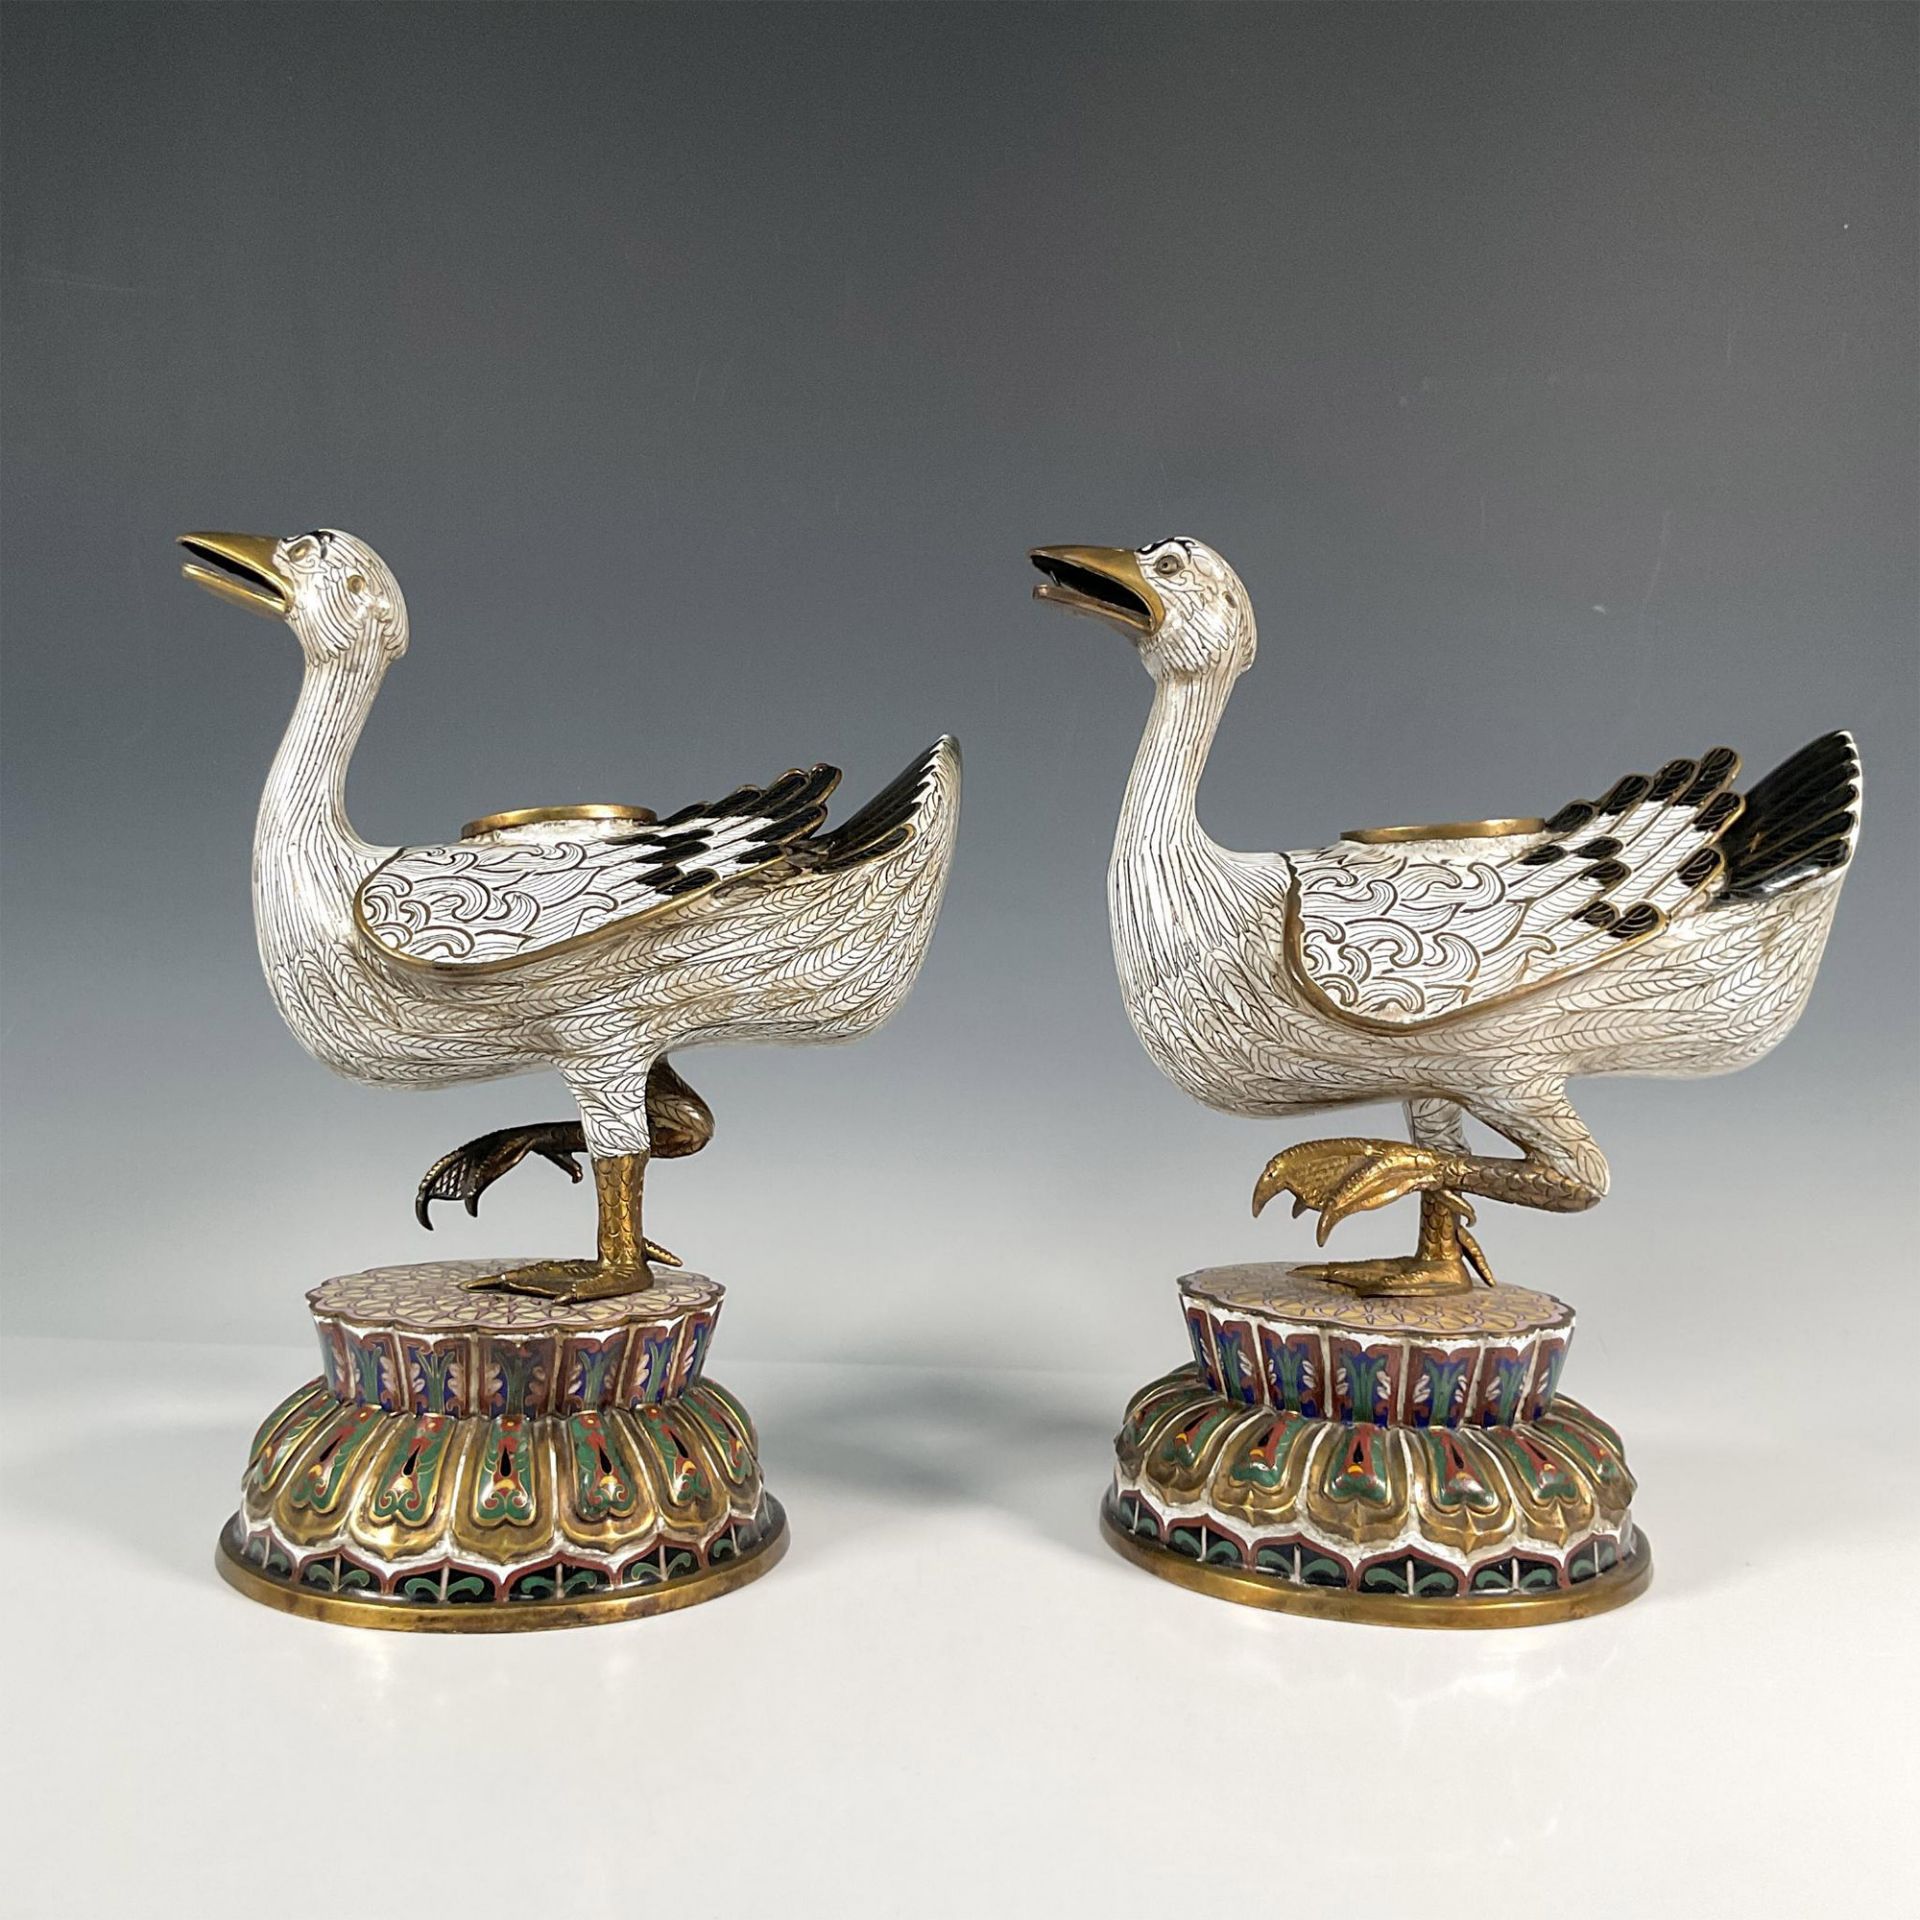 Pair of Chinese Cloisonne Duck Censers - Image 7 of 11